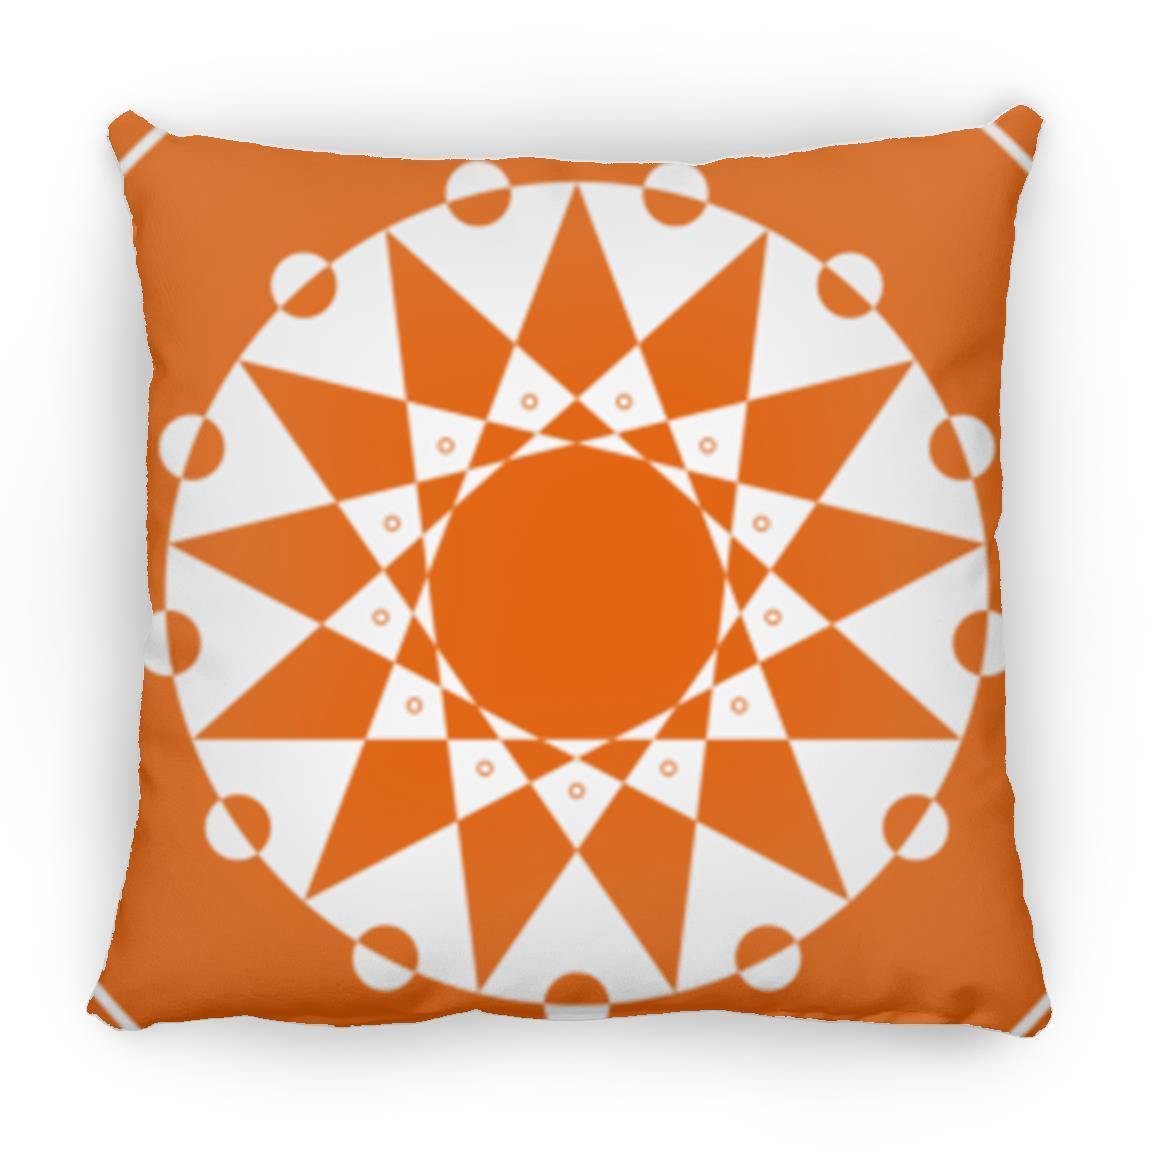 Crop Circle Pillow - West Stowell - Shapes of Wisdom